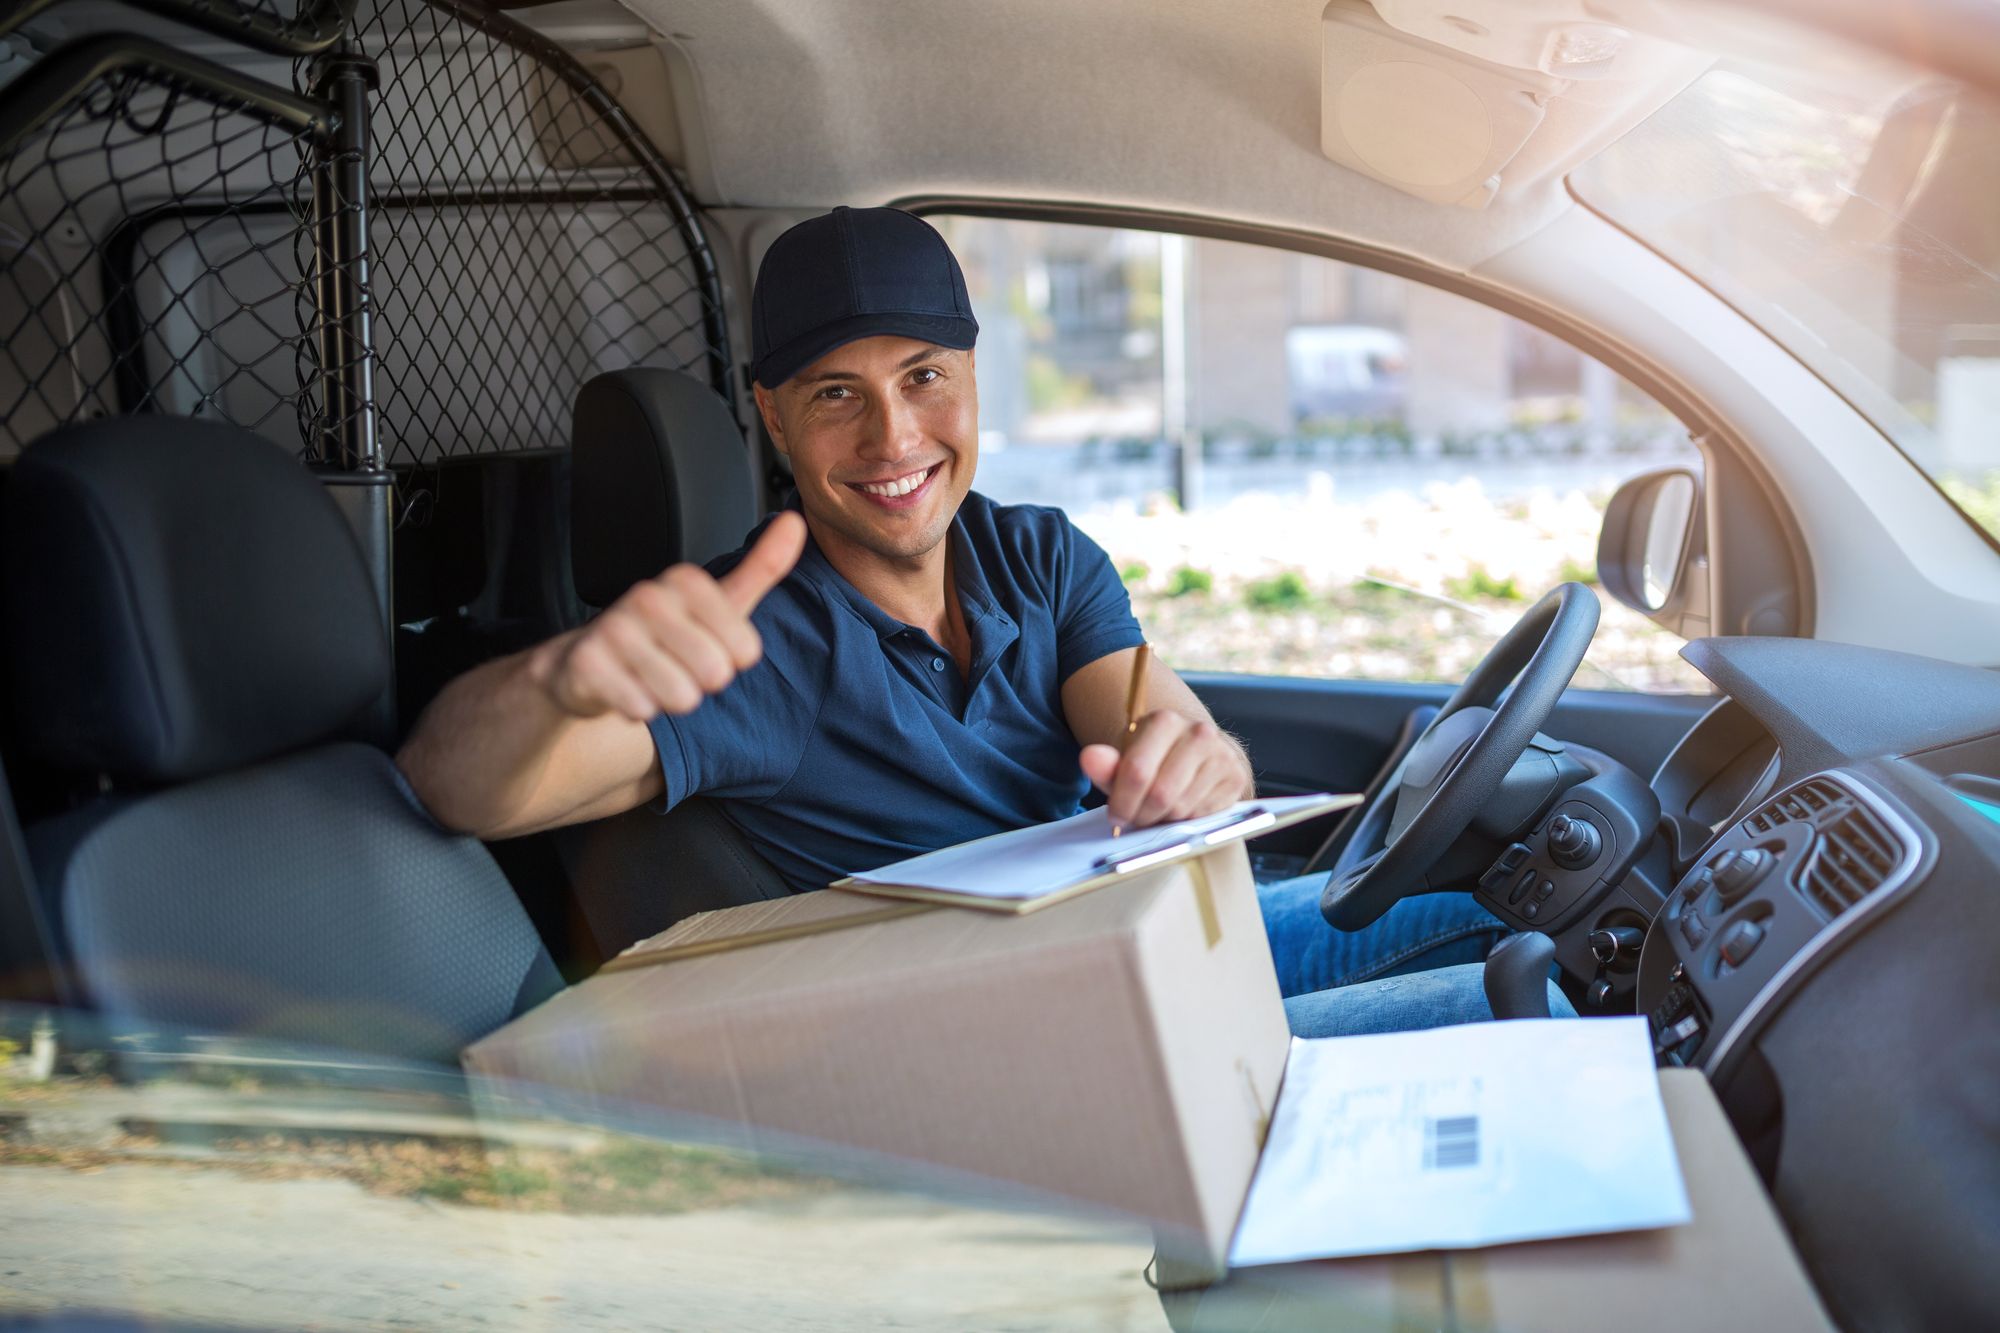 Delivery man sitting in a delivery van